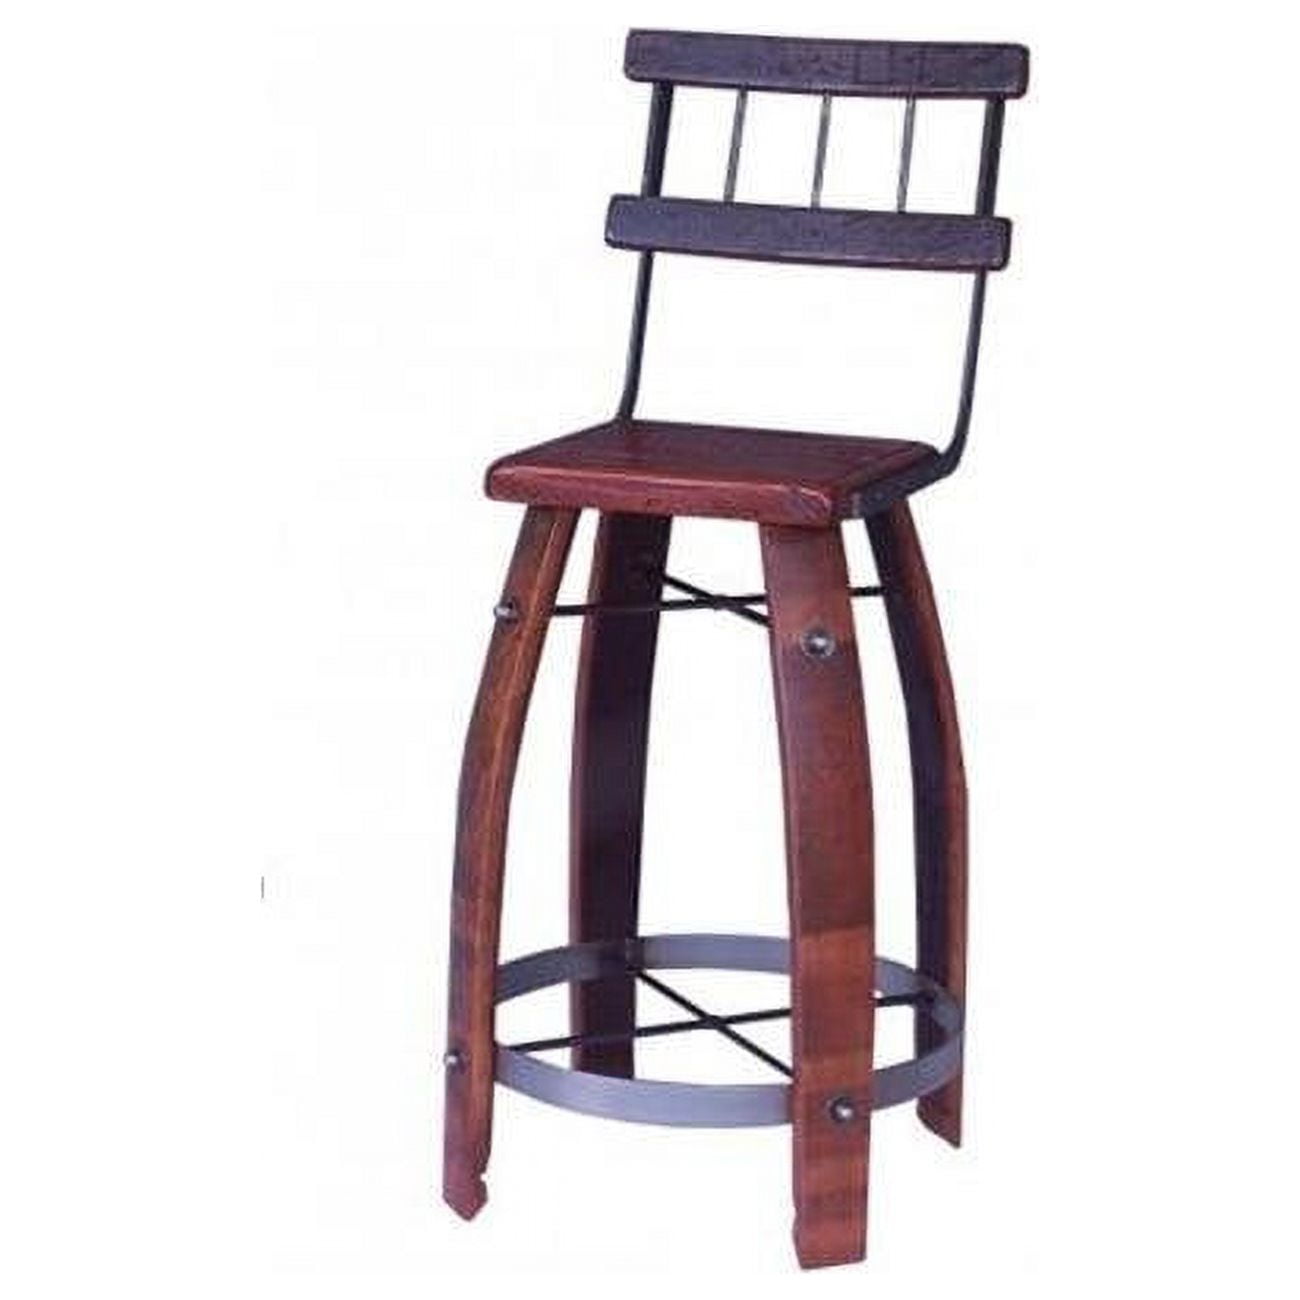 Picture of 2 Day Designs 169W26 26 in. Wood Stave Stool with Back